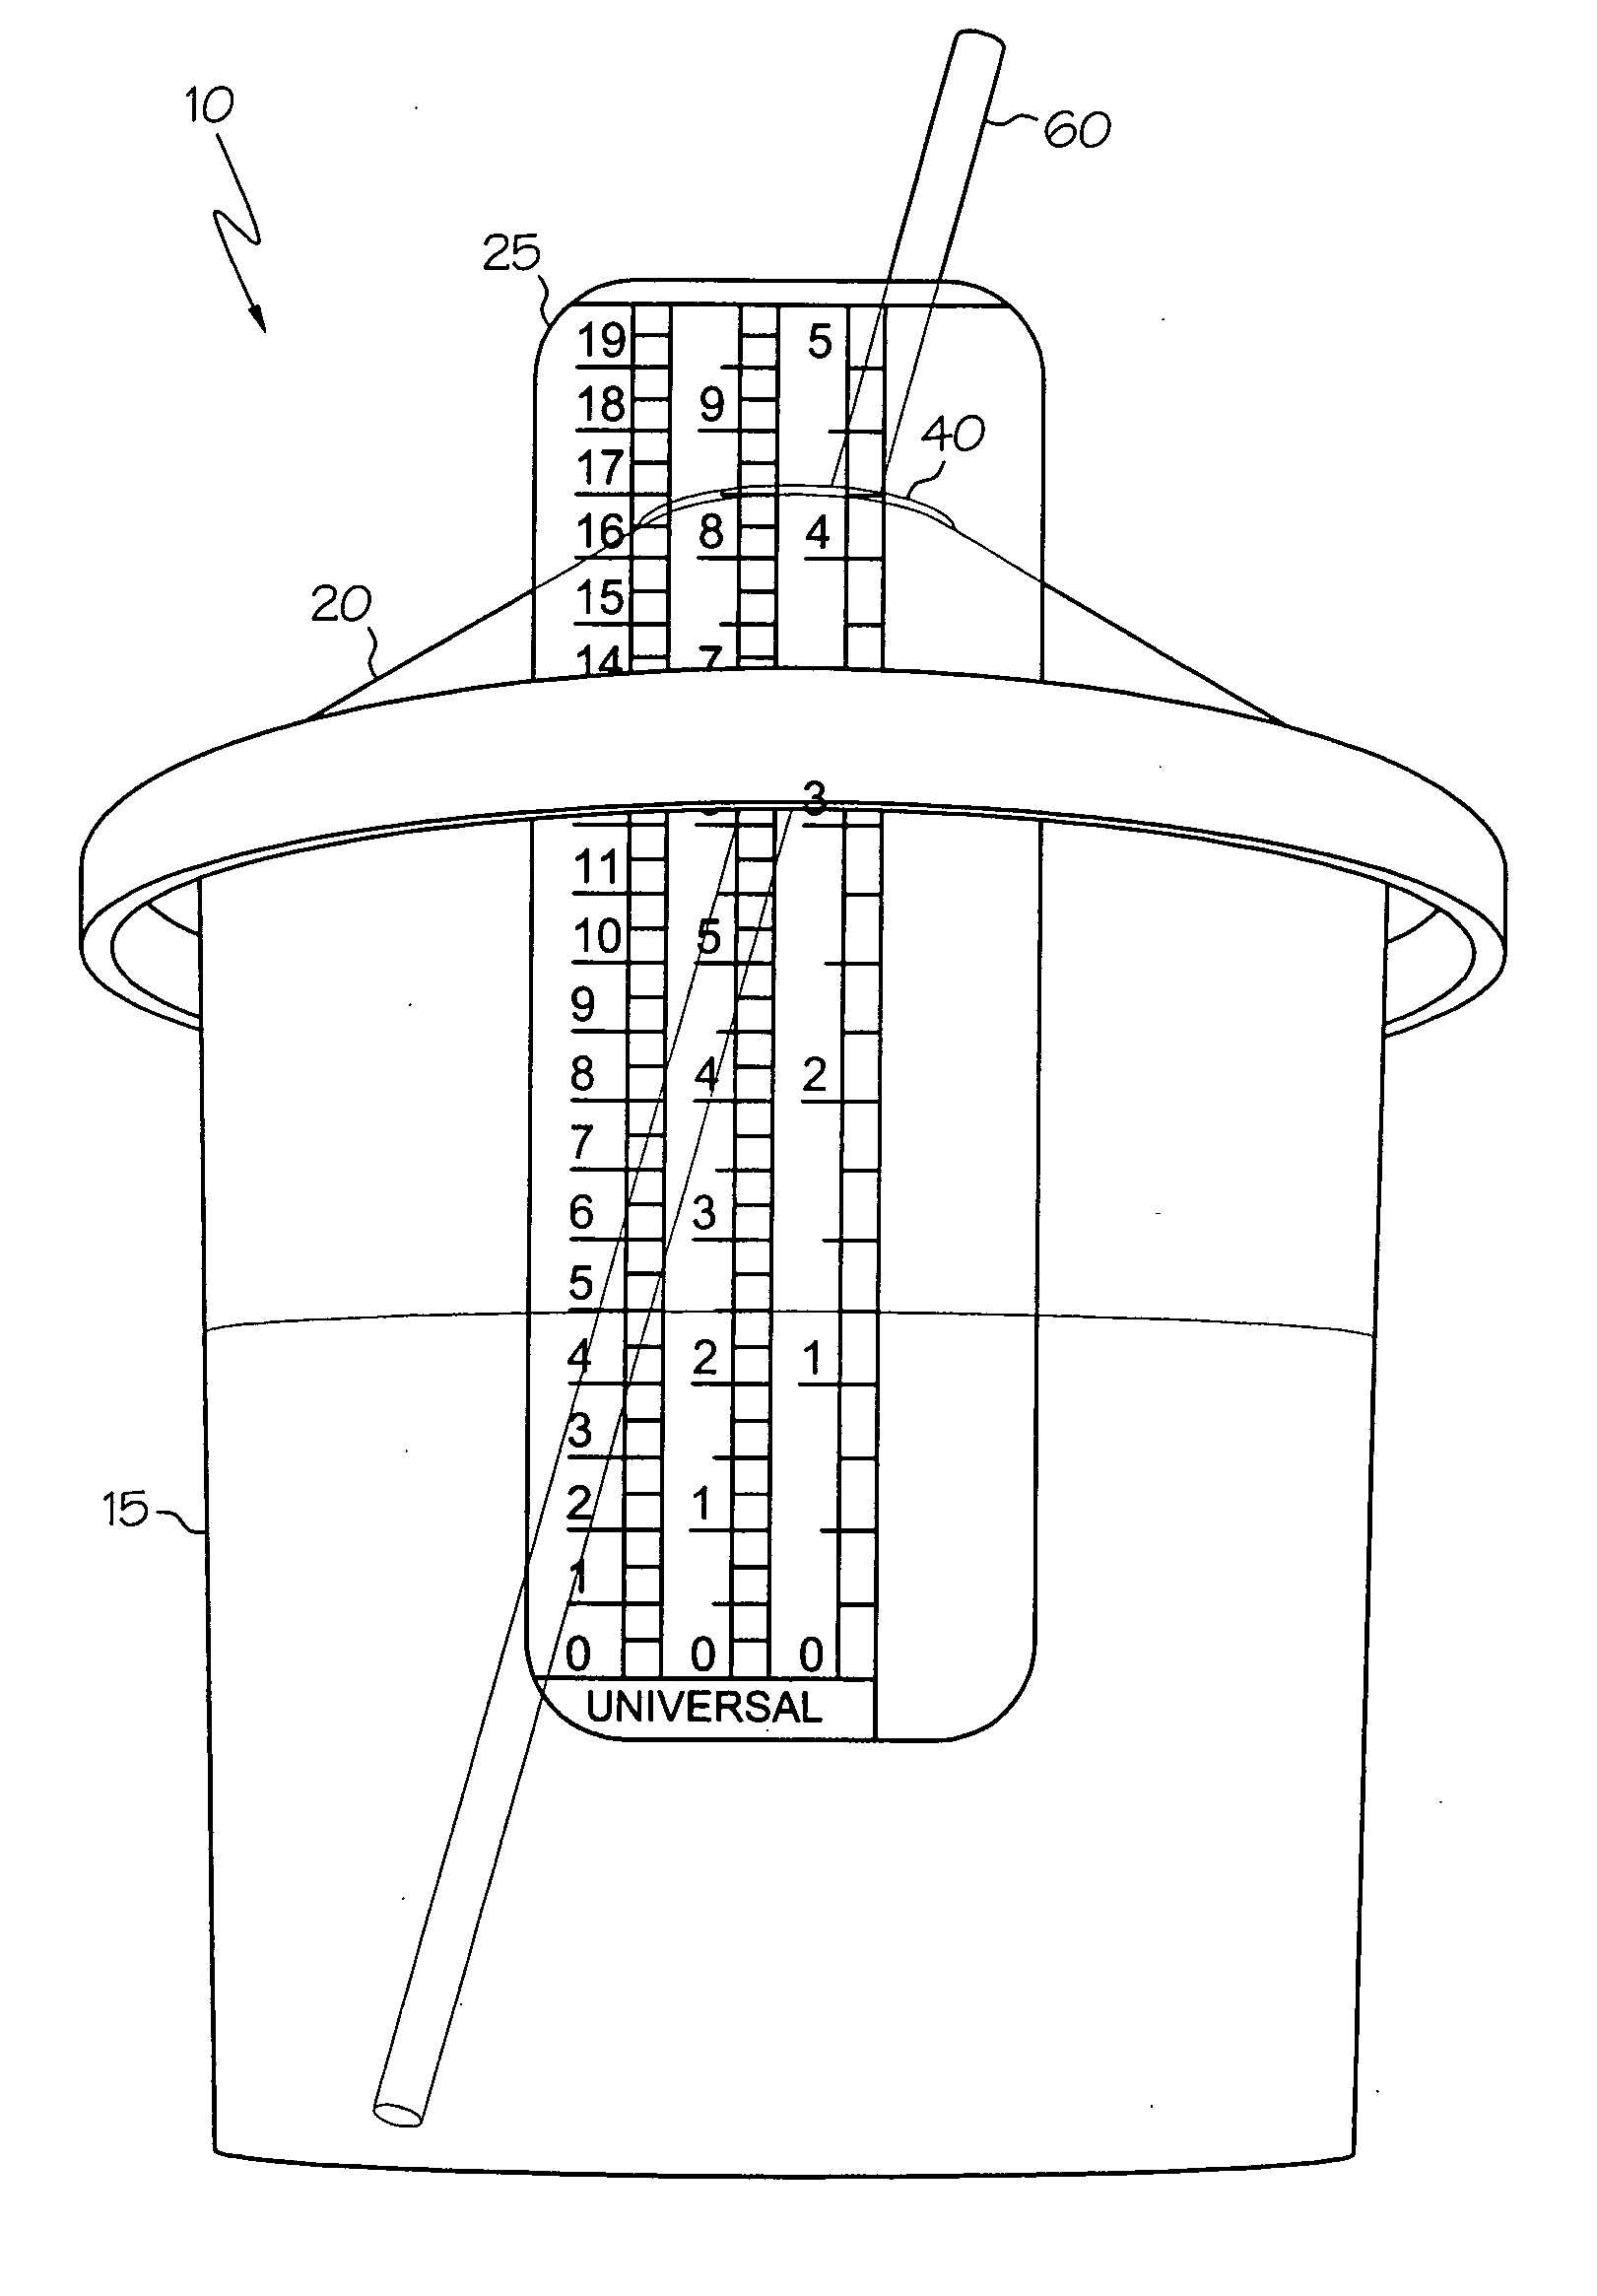 Fluid supply assembly with measuring guide